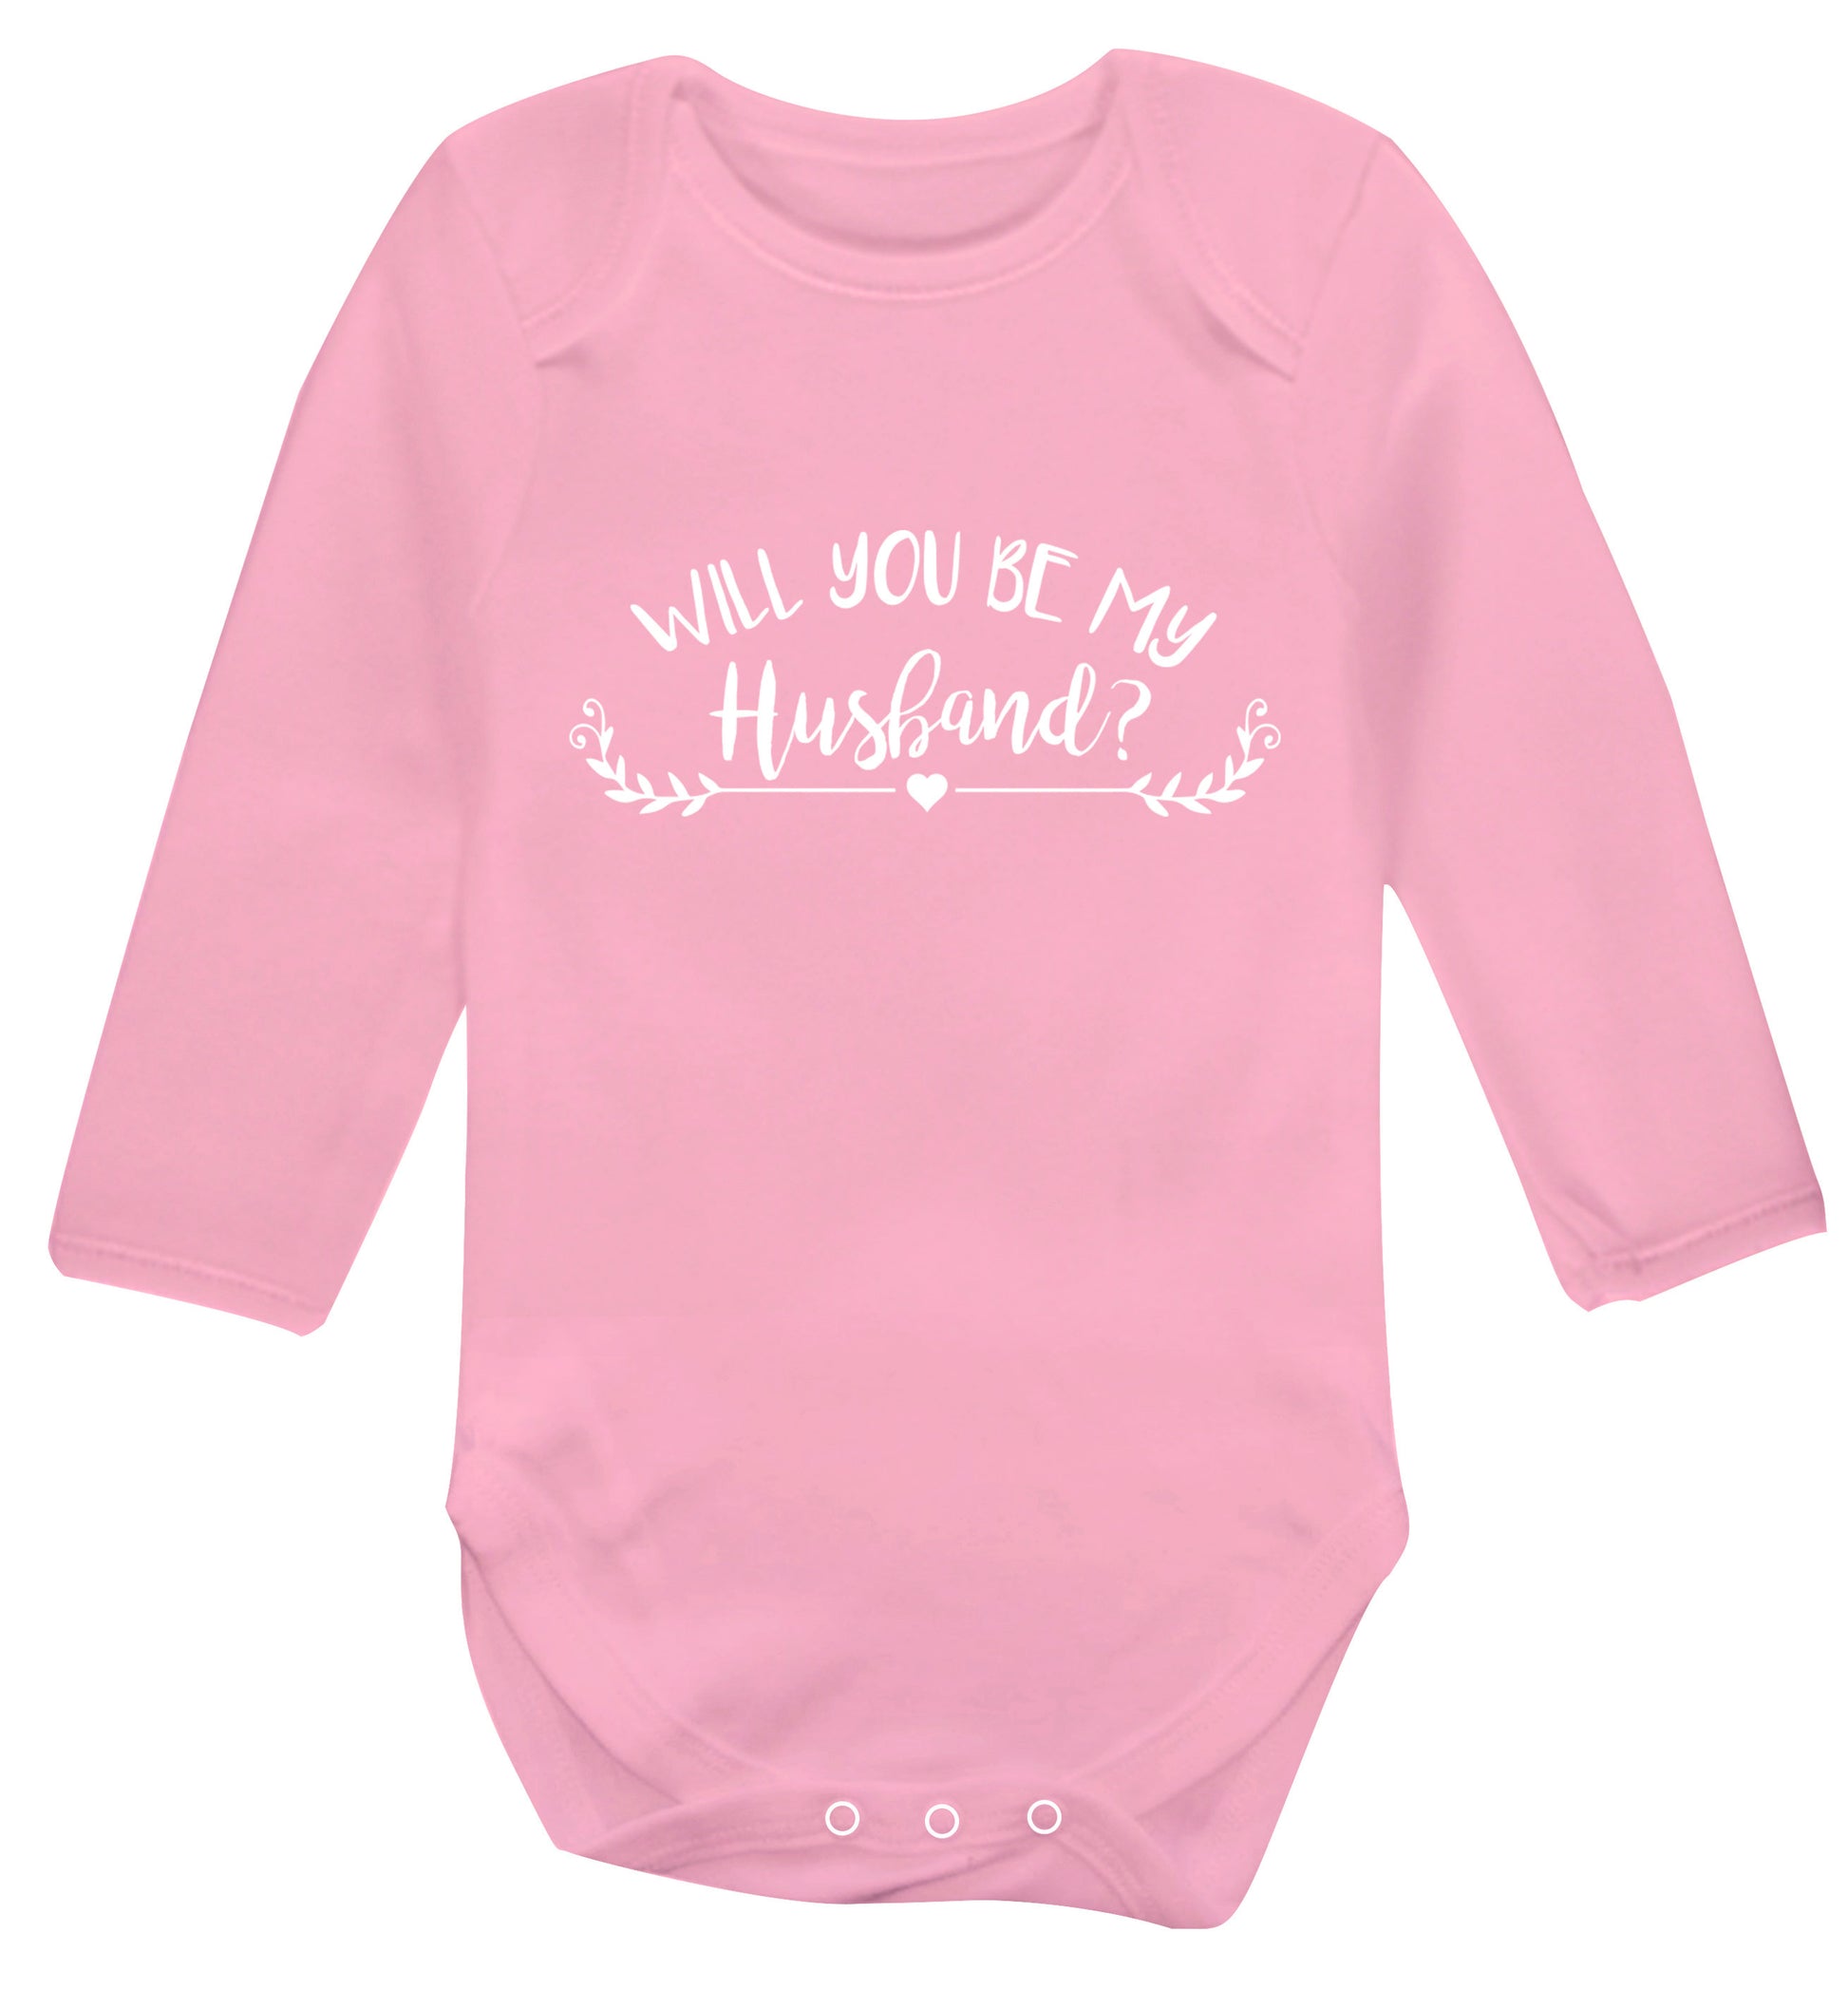 Will you be my husband? Baby Vest long sleeved pale pink 6-12 months